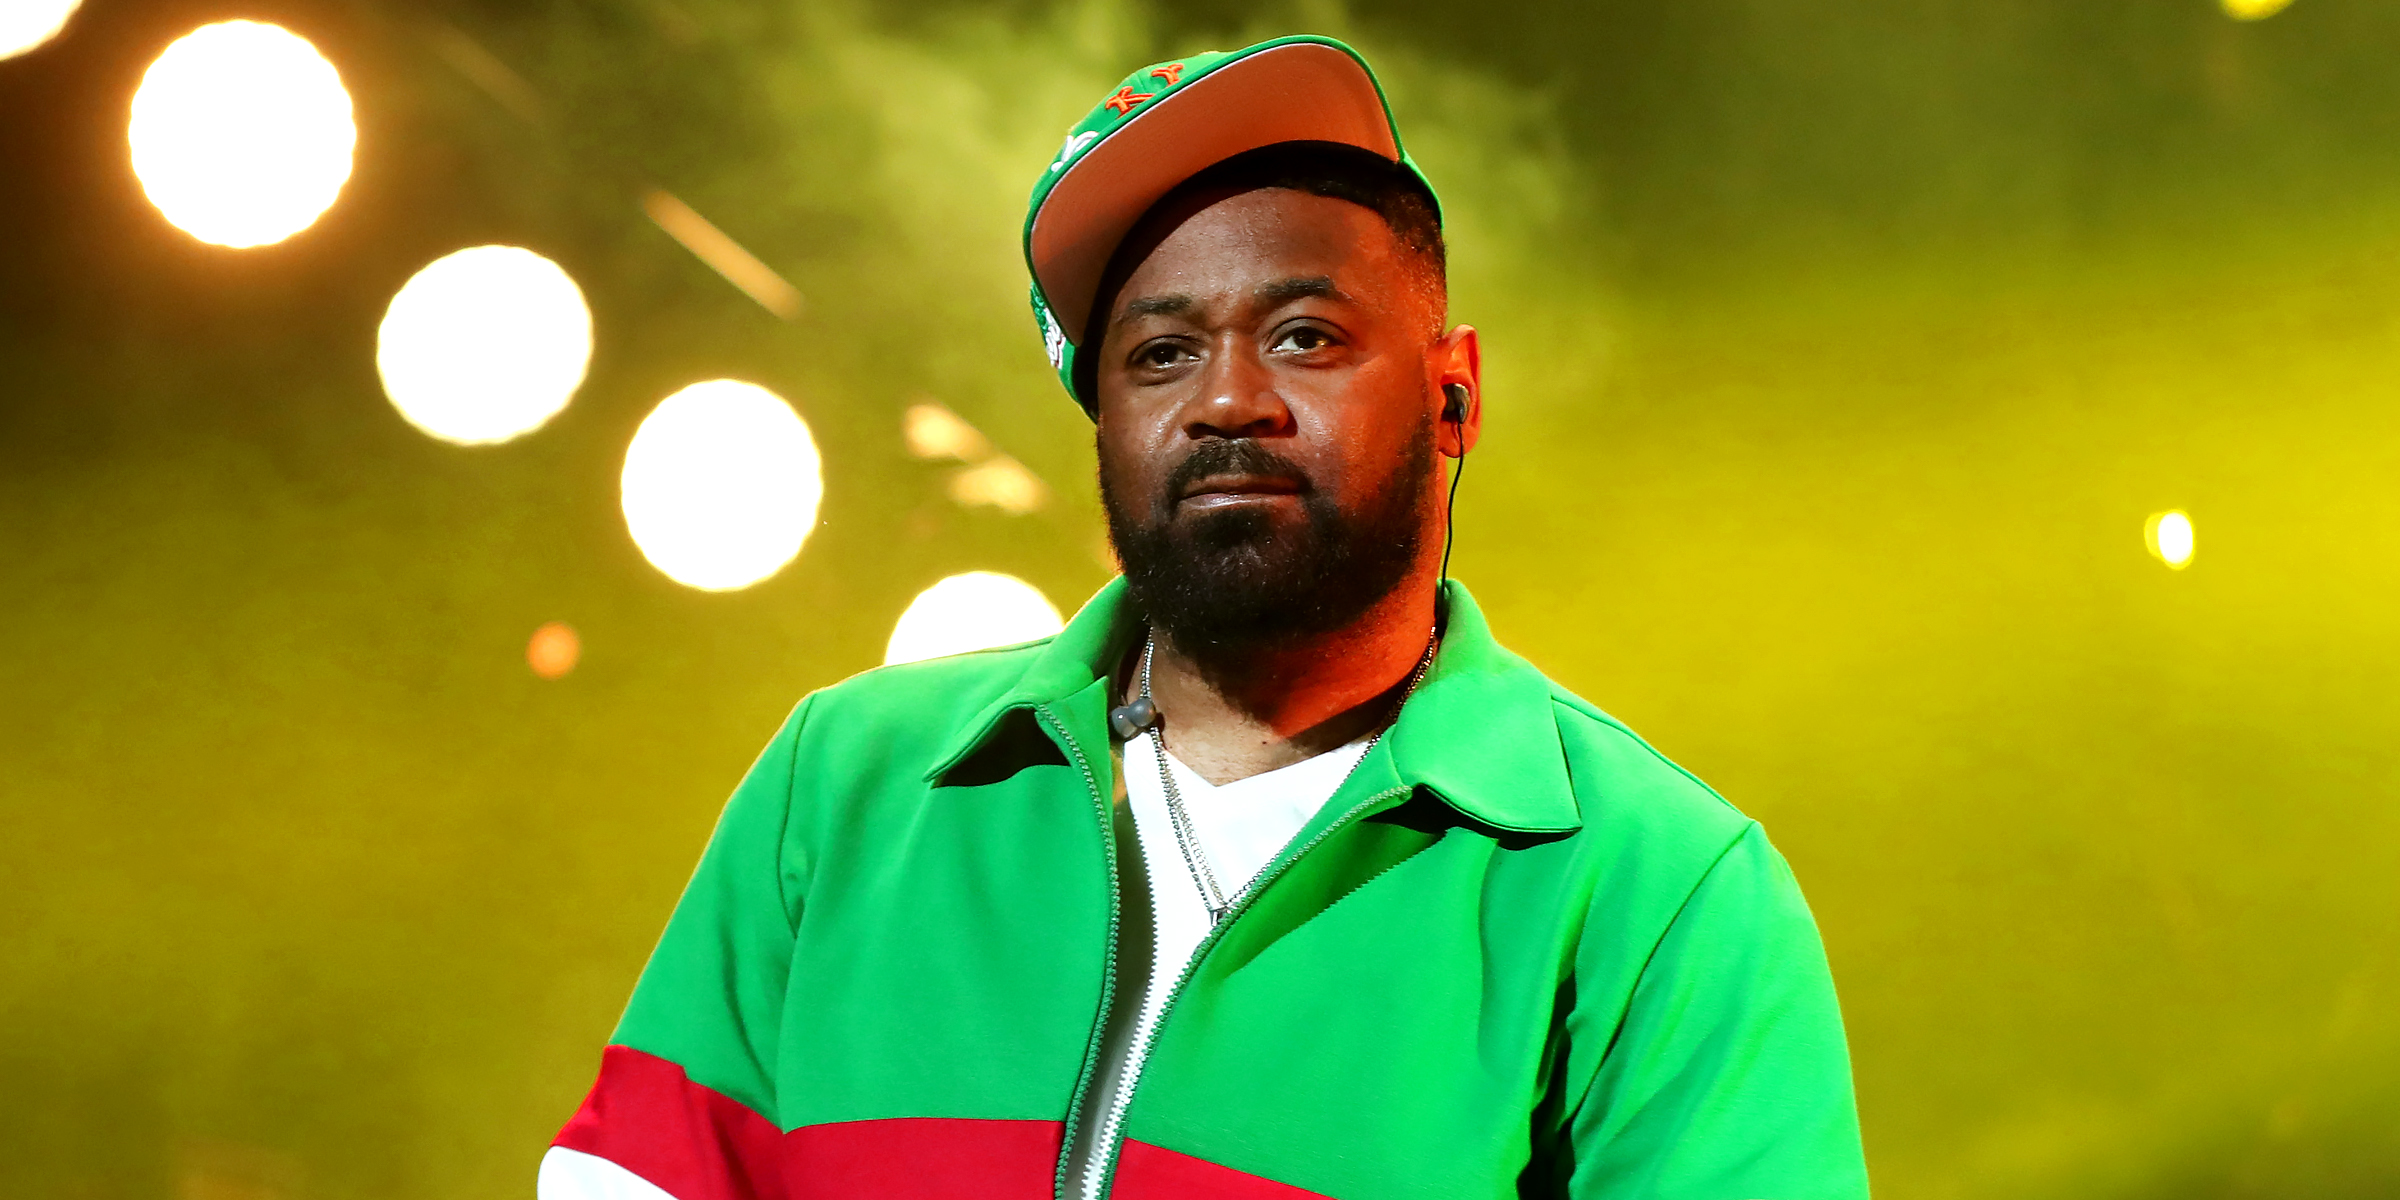 Ghostface Killah | Source: Getty Images